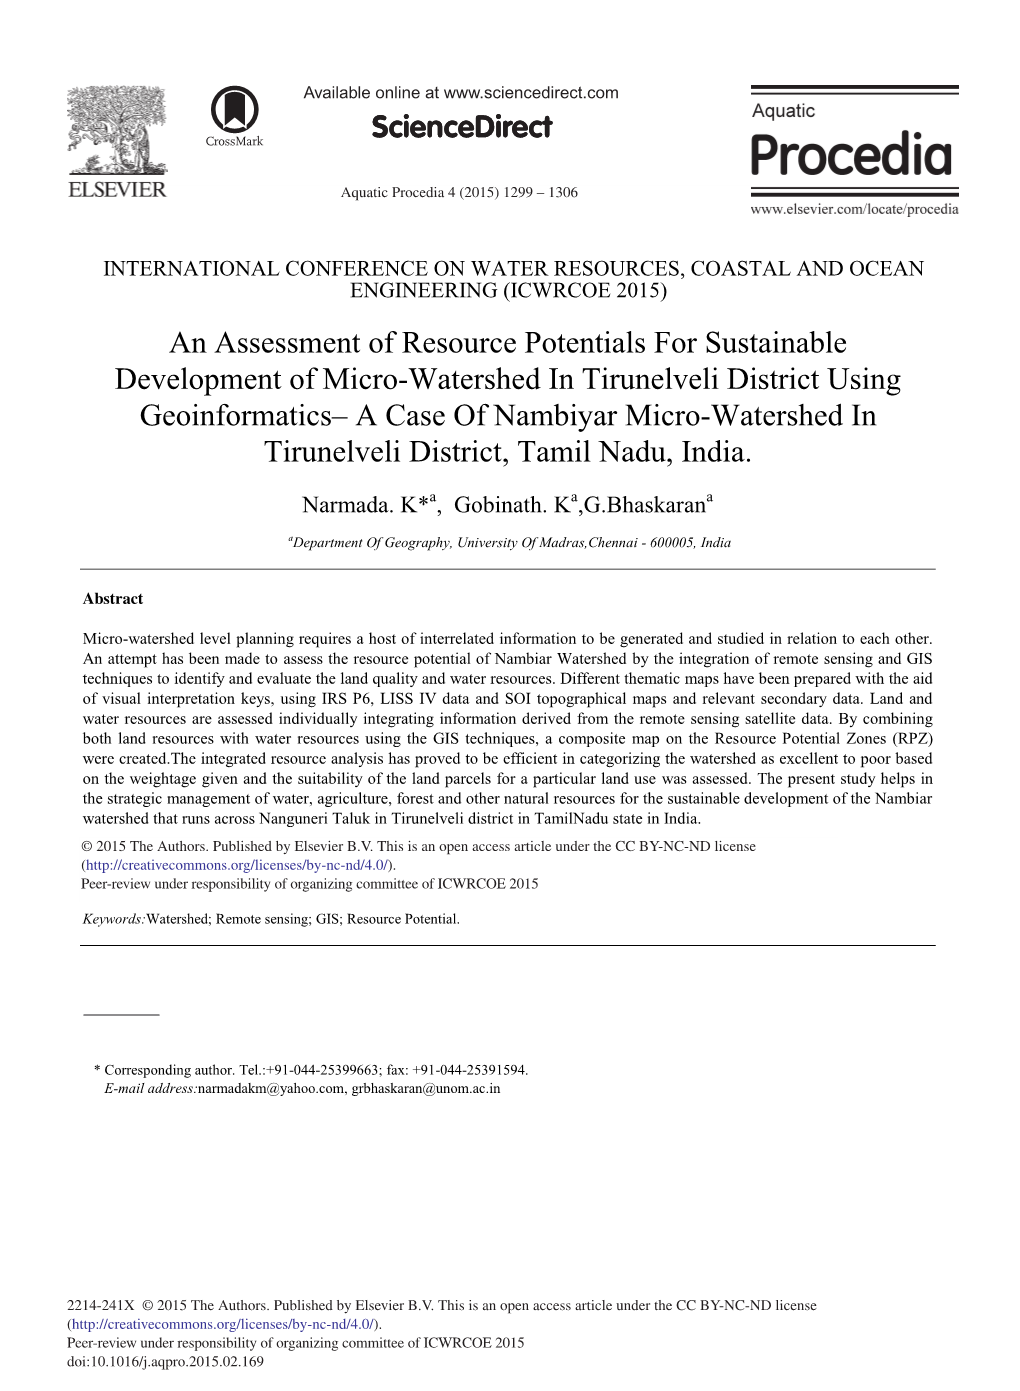 An Assessment of Resource Potentials for Sustainable Development of Micro-Watershed in Tirunelveli District Using Geoinformatics